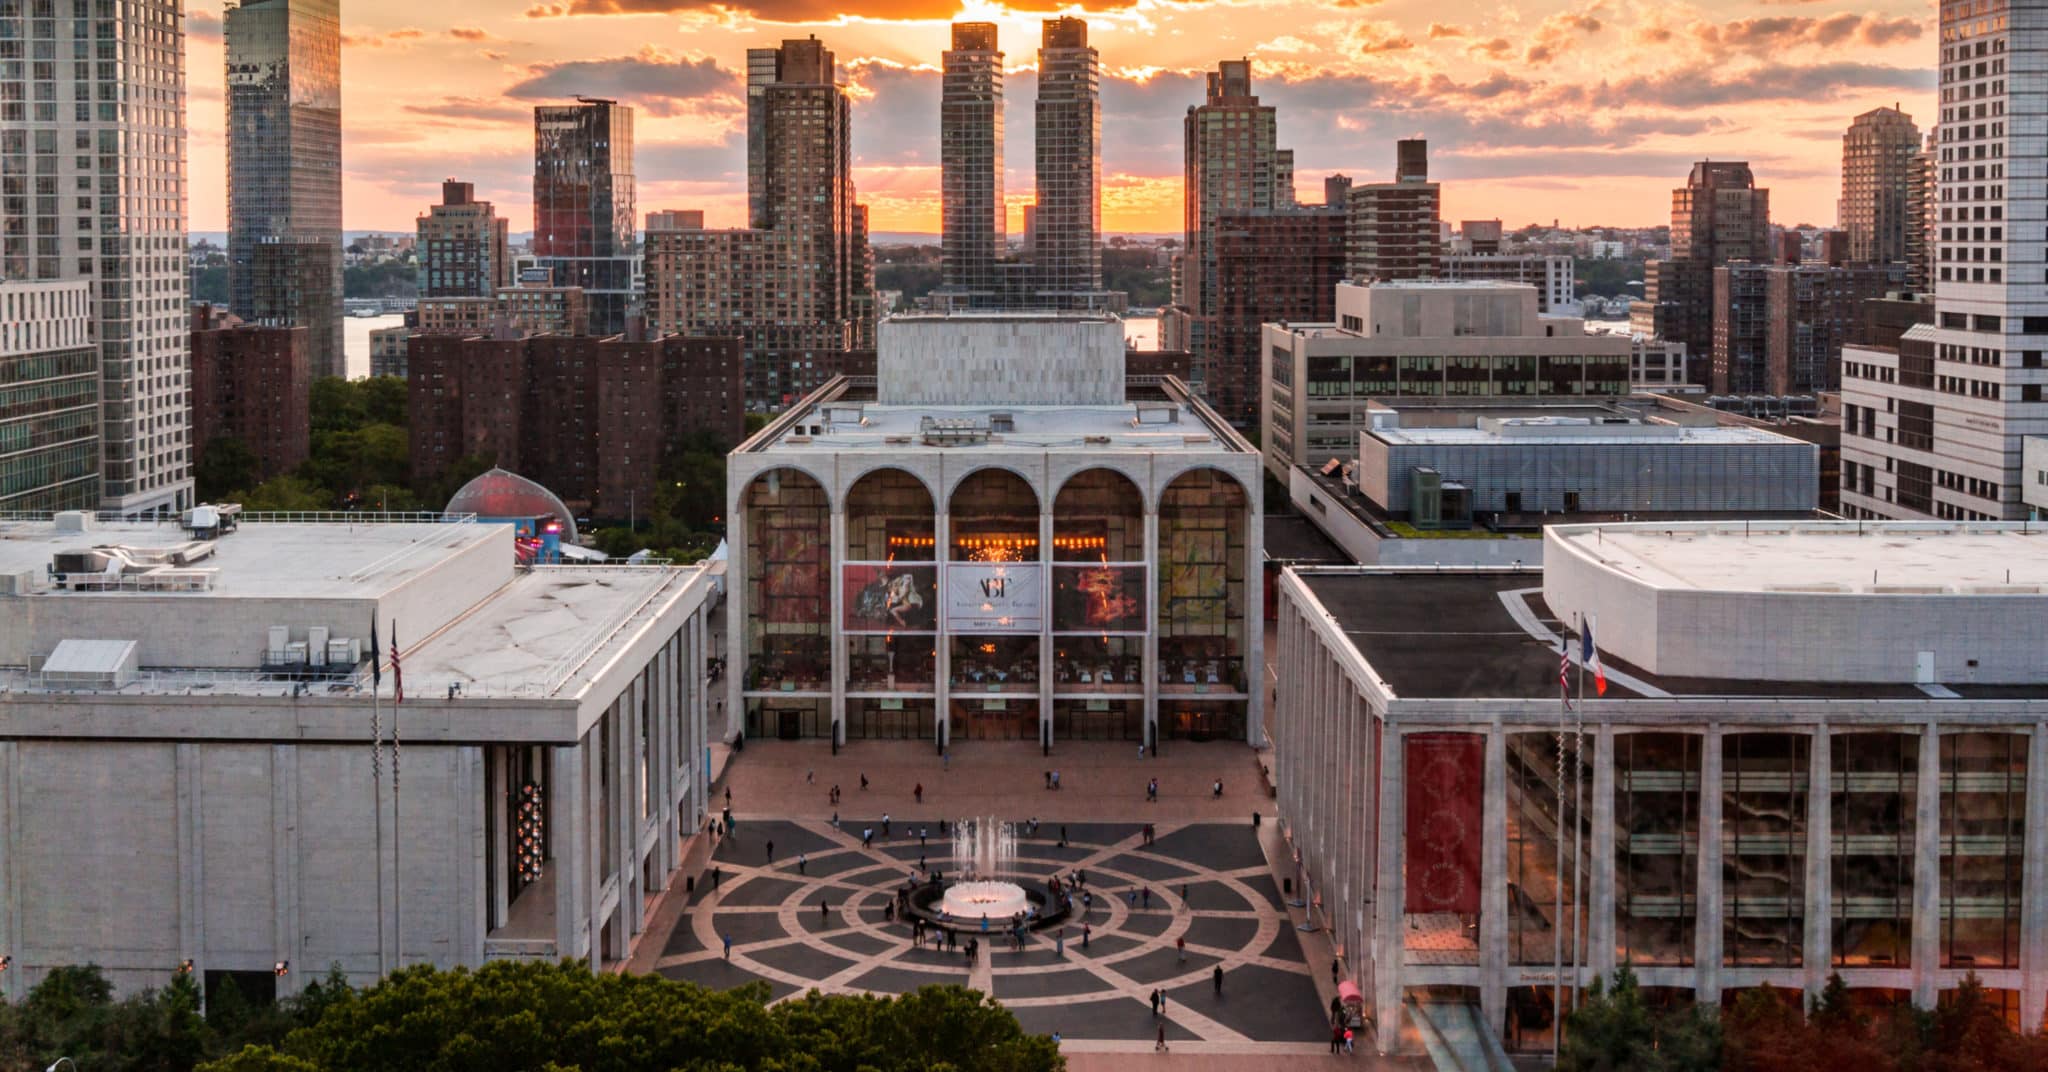 Lincoln Center is New York's premier performing arts center